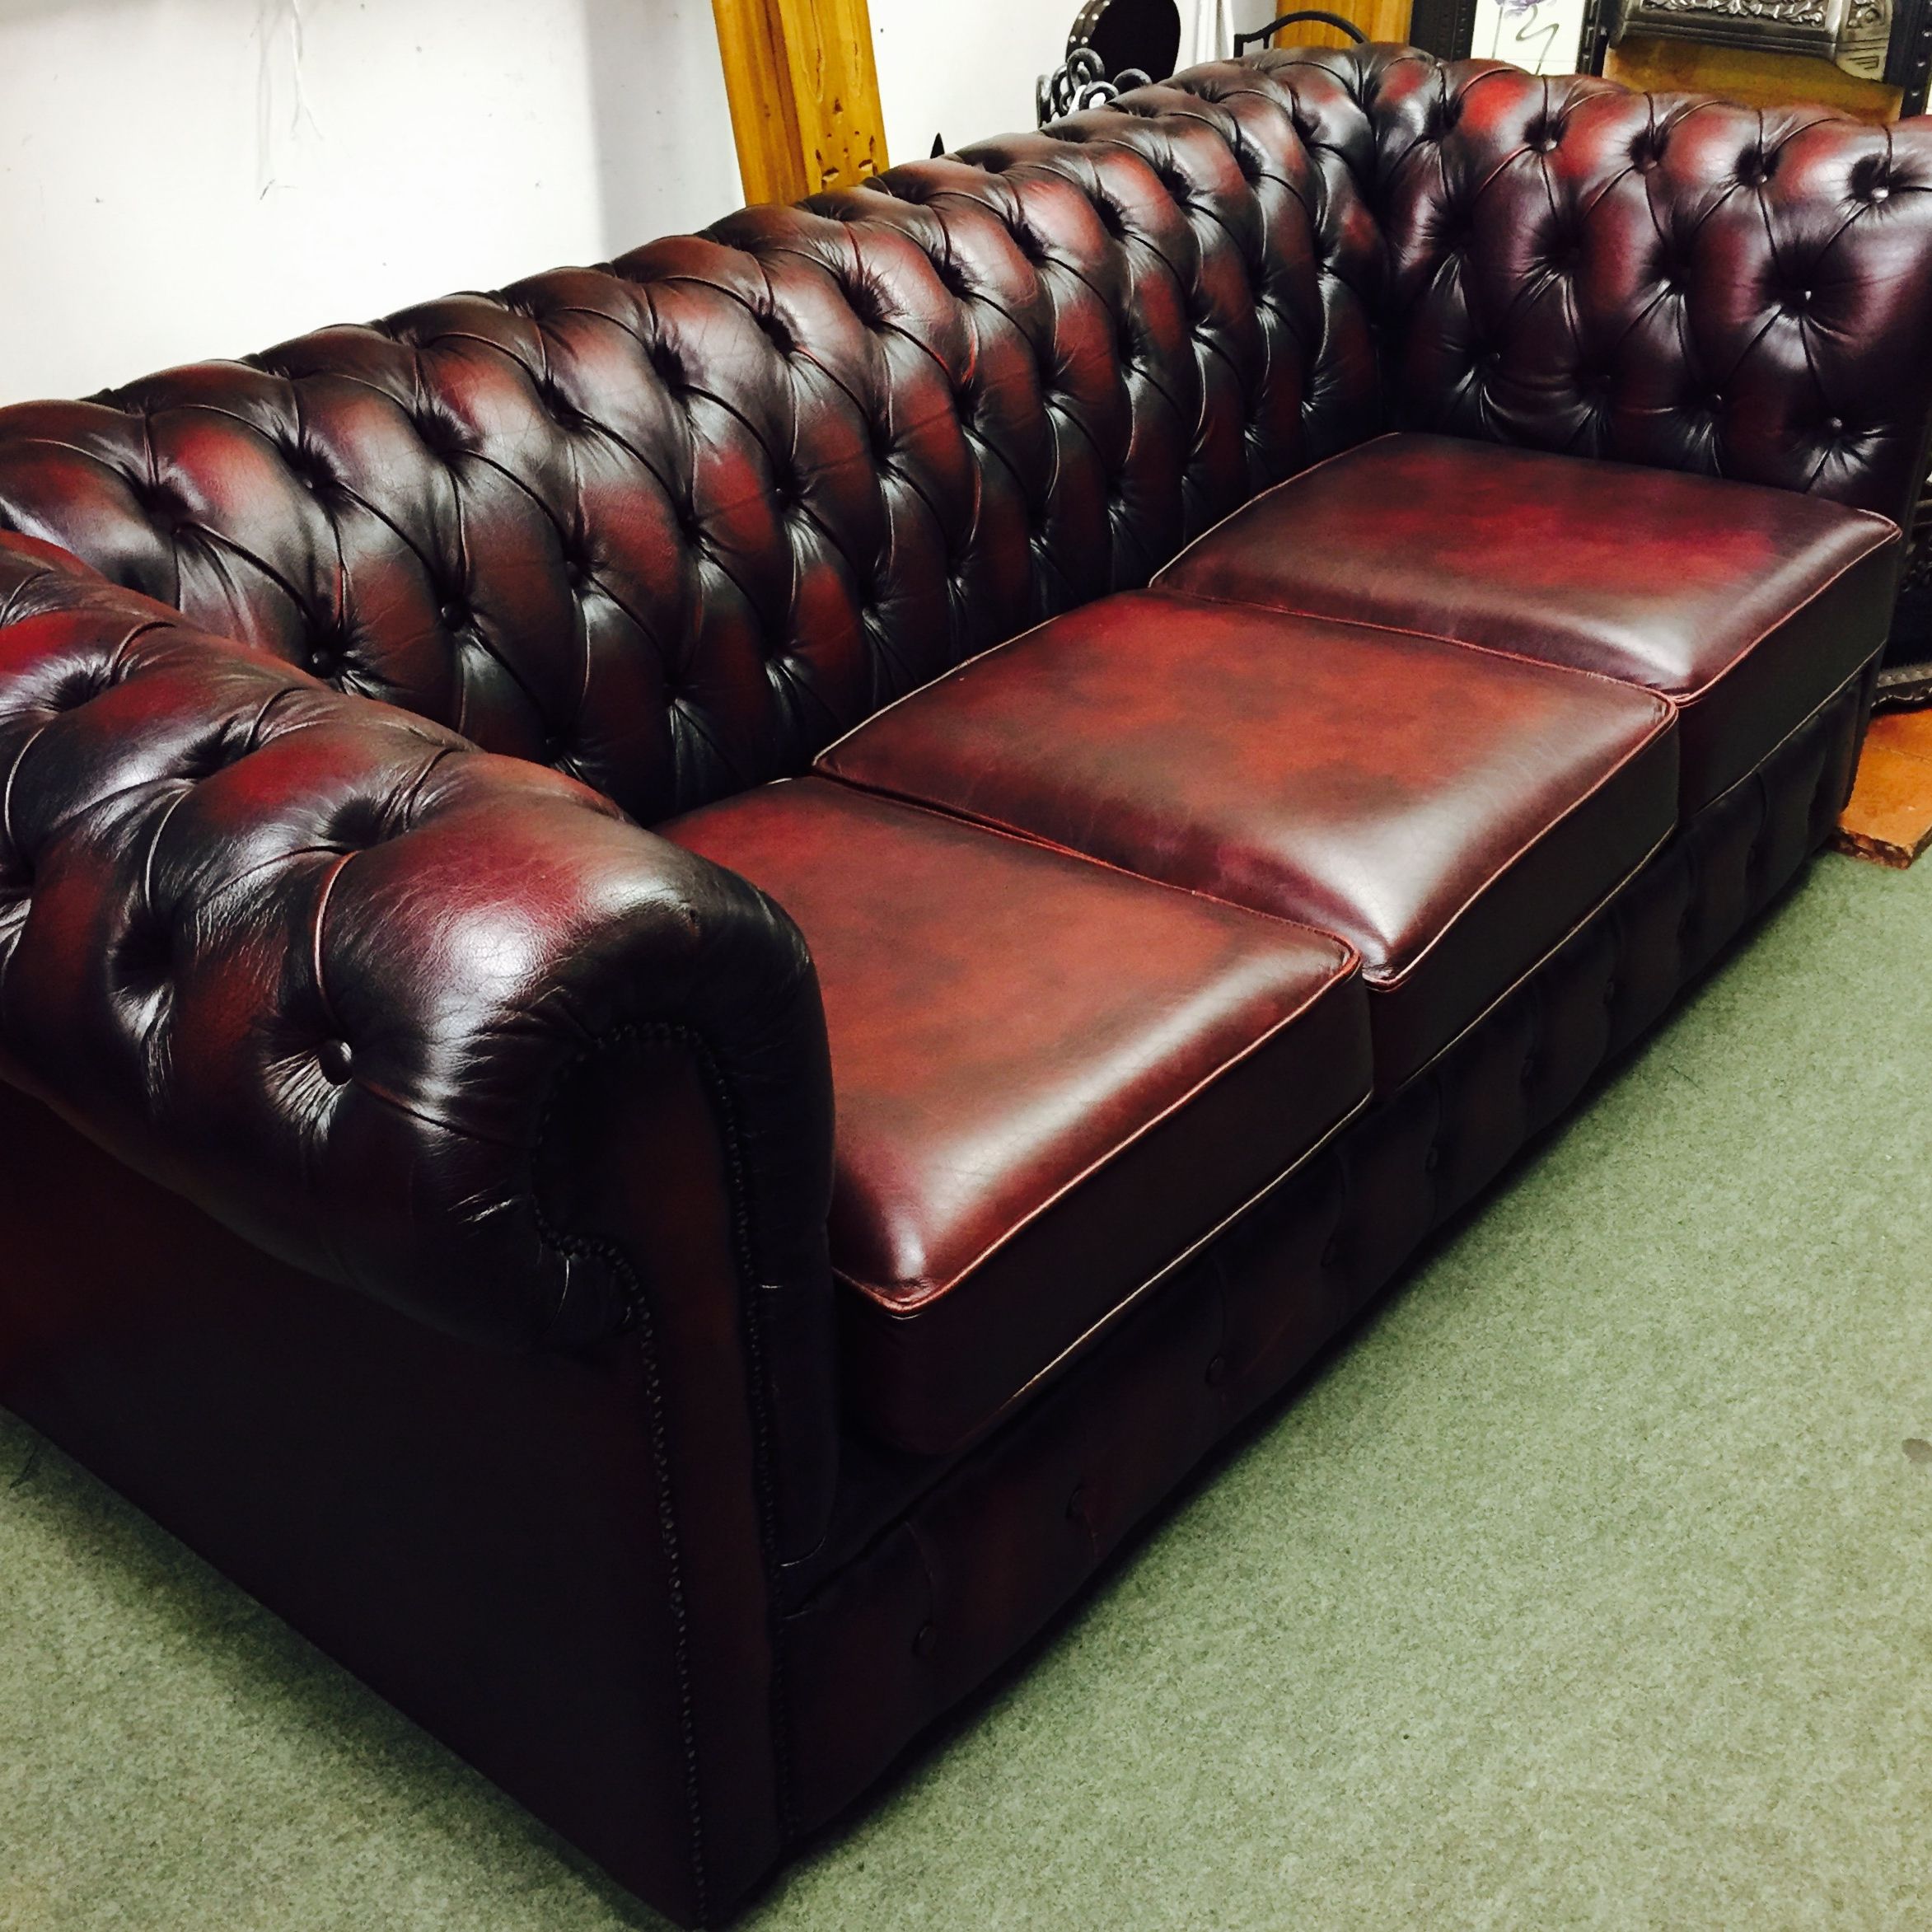 The Dog House Antiques – Pair Of Chesterfield Style Sofa’s Regarding Chesterfield Sofas (View 11 of 20)